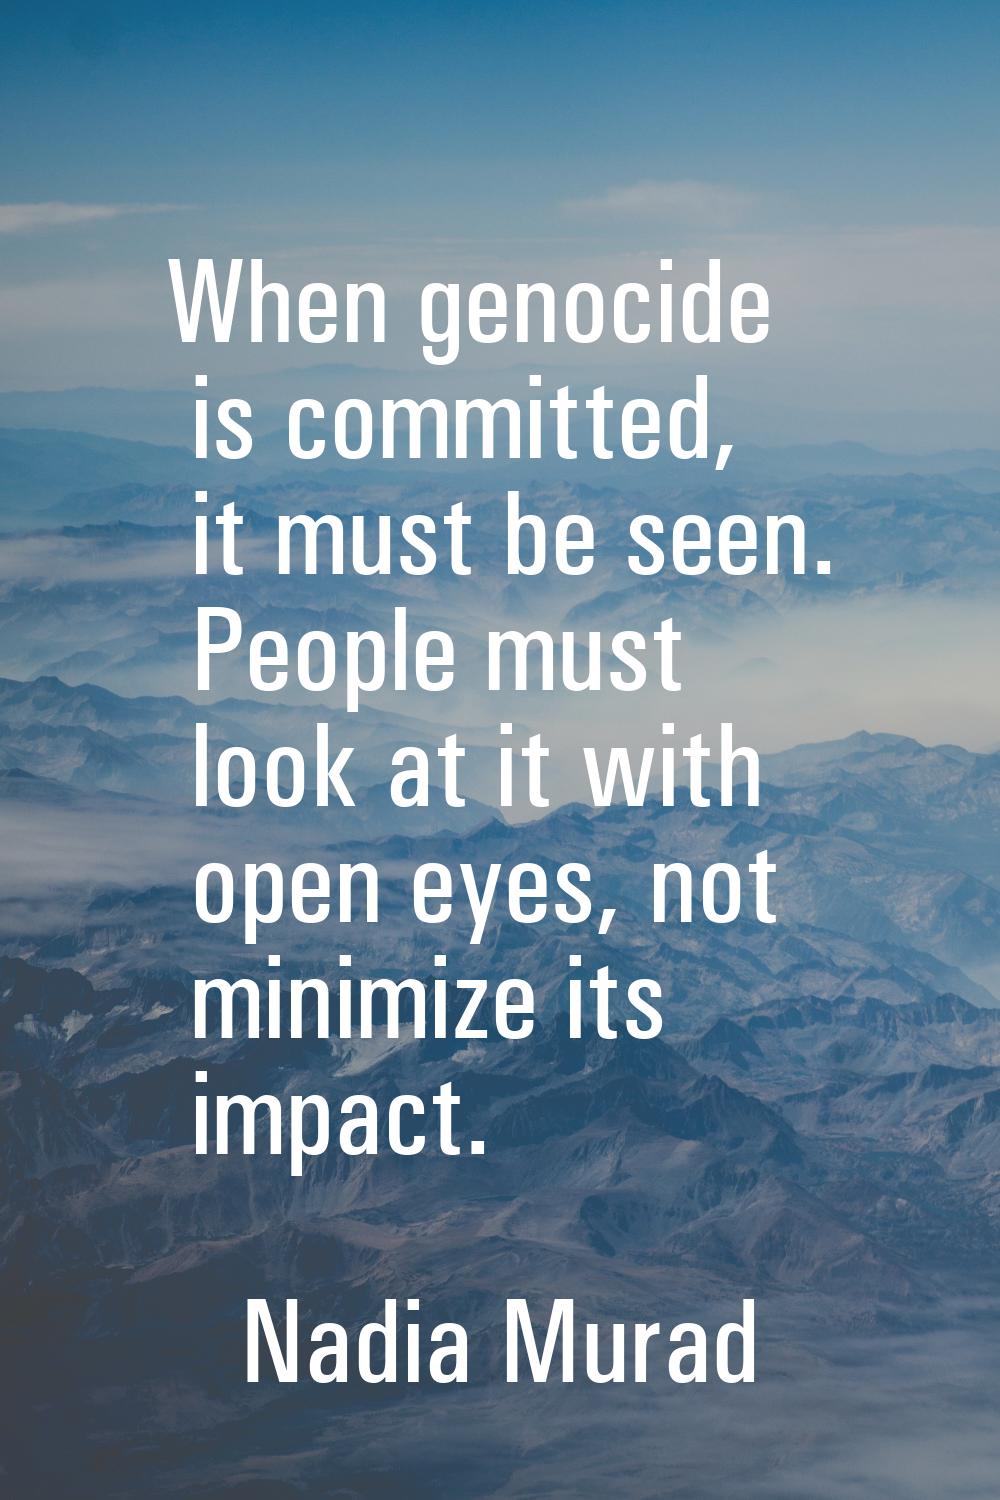 When genocide is committed, it must be seen. People must look at it with open eyes, not minimize it